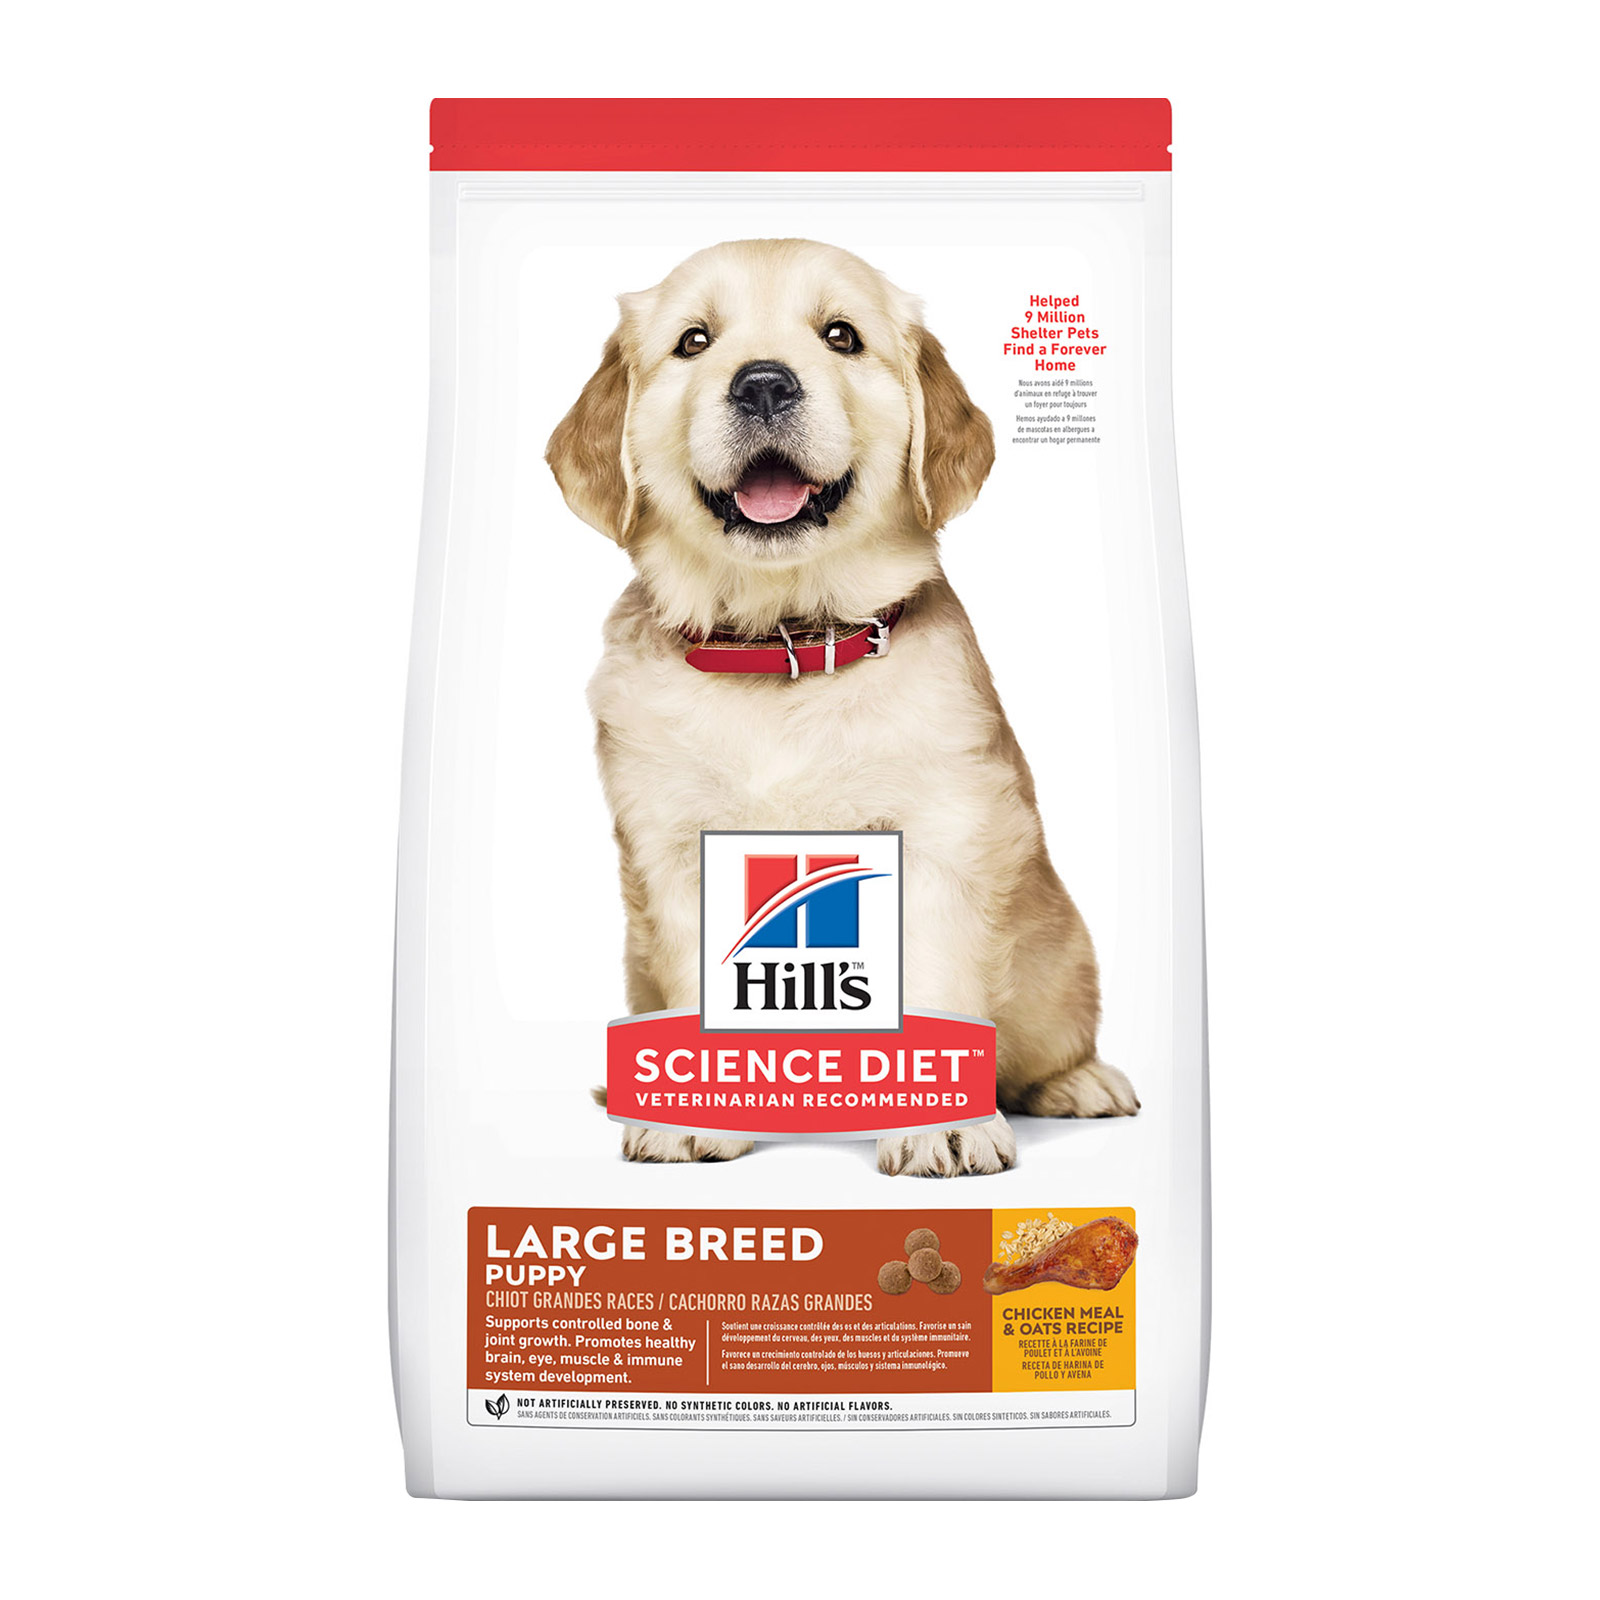 Hill's Science Diet Puppy Large Breed Chicken & Oats Dry Dog Food for Food